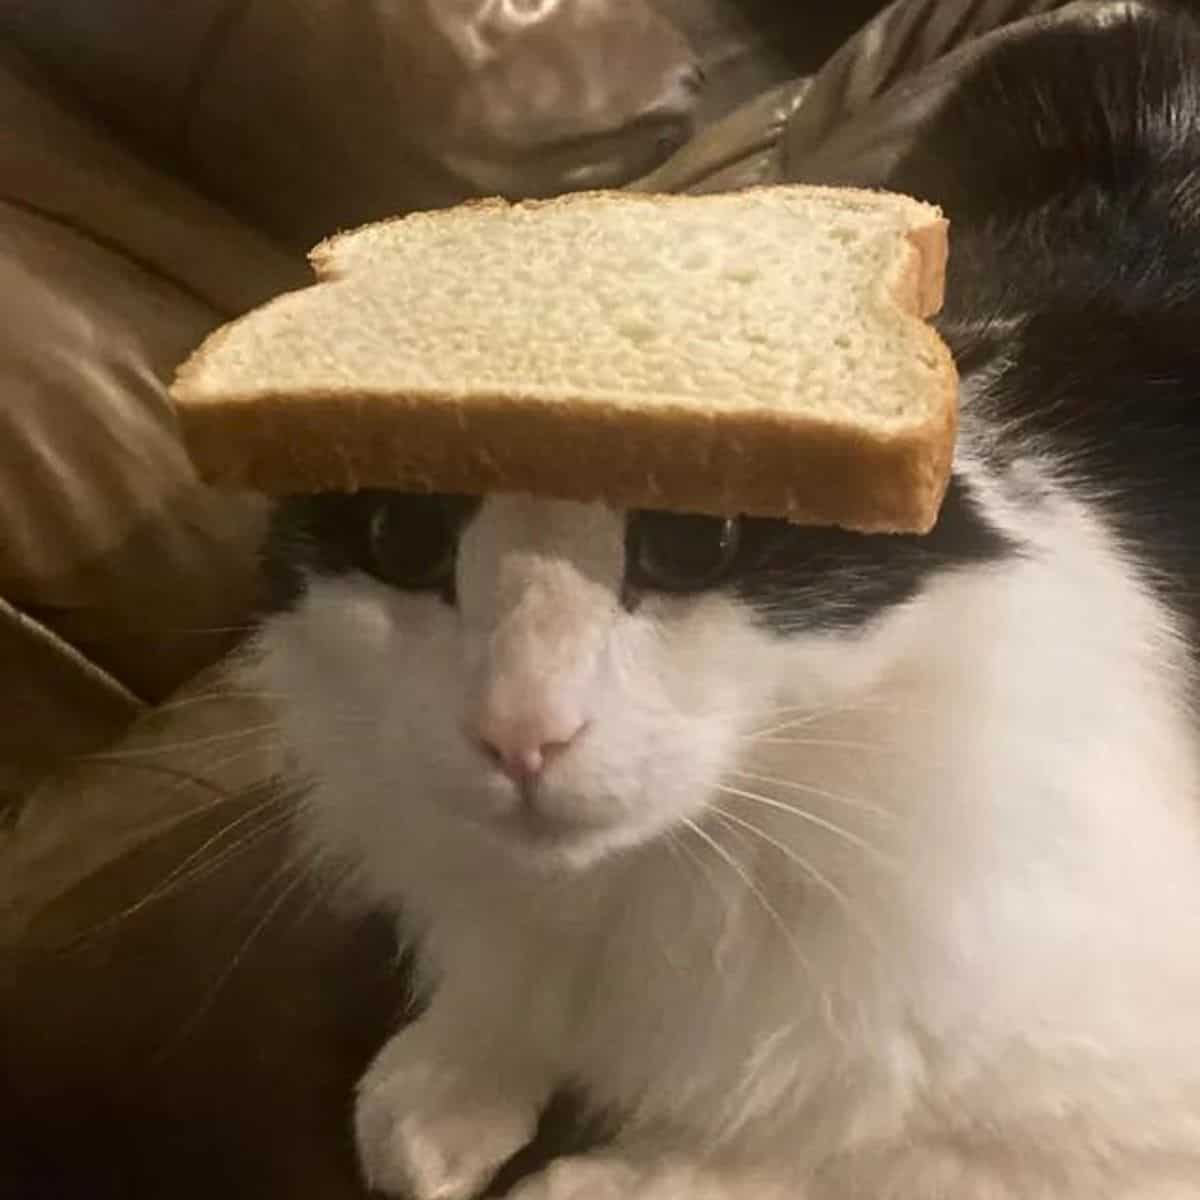 cat with a slice of bread on its head